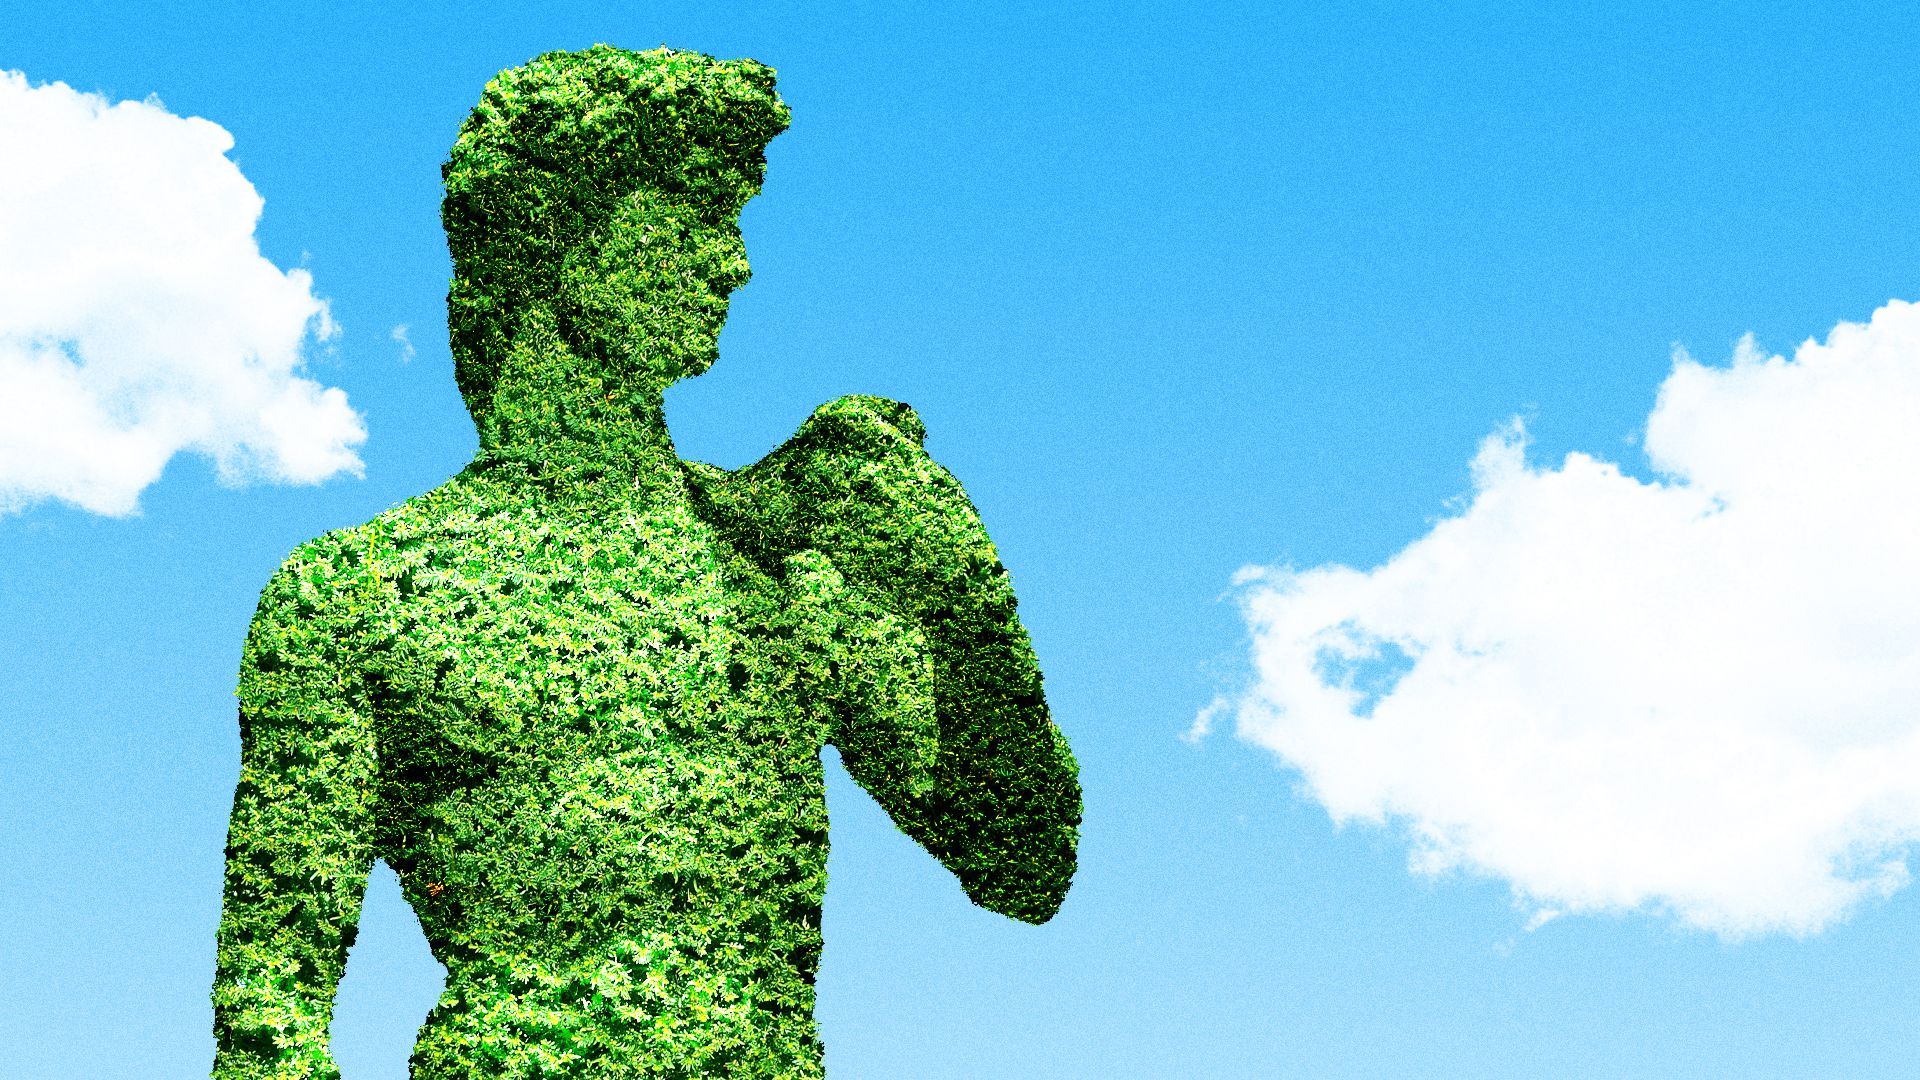 Illustration of Michelangelo's David as a topiary sculpture.